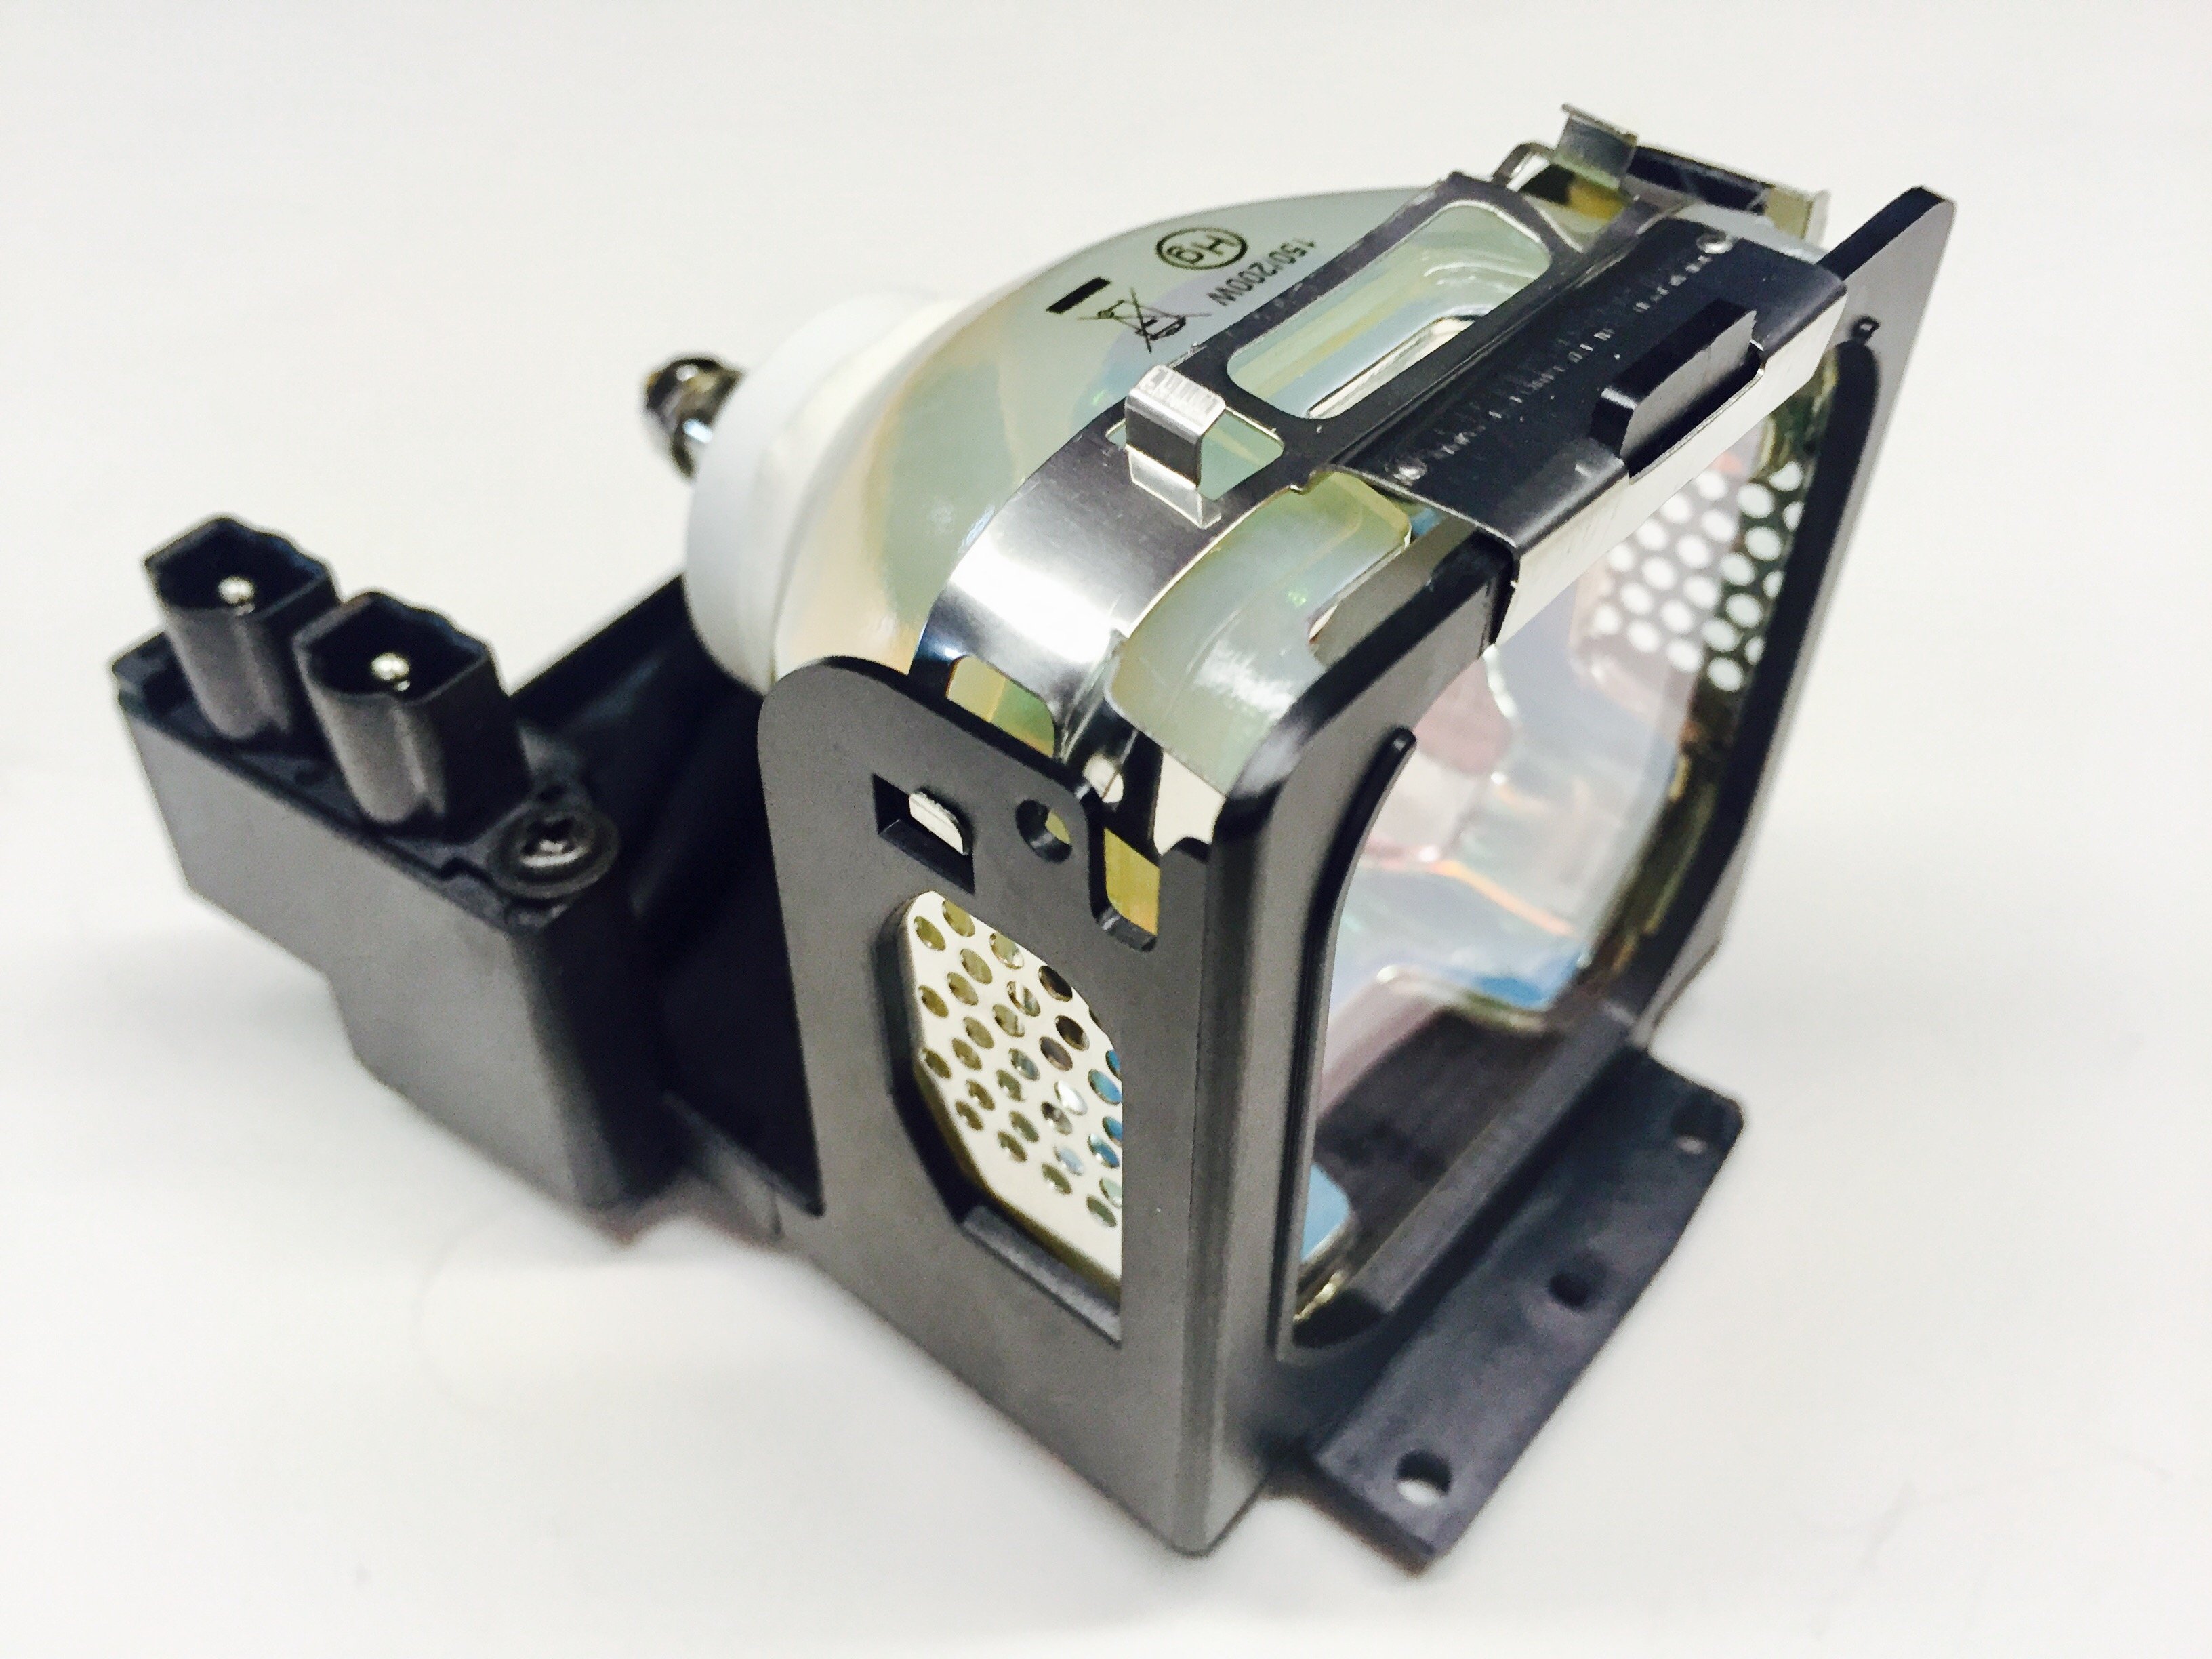 610-300-7267 Replacement Lamp & Housing for Boxlight Projectors - image 1 of 1